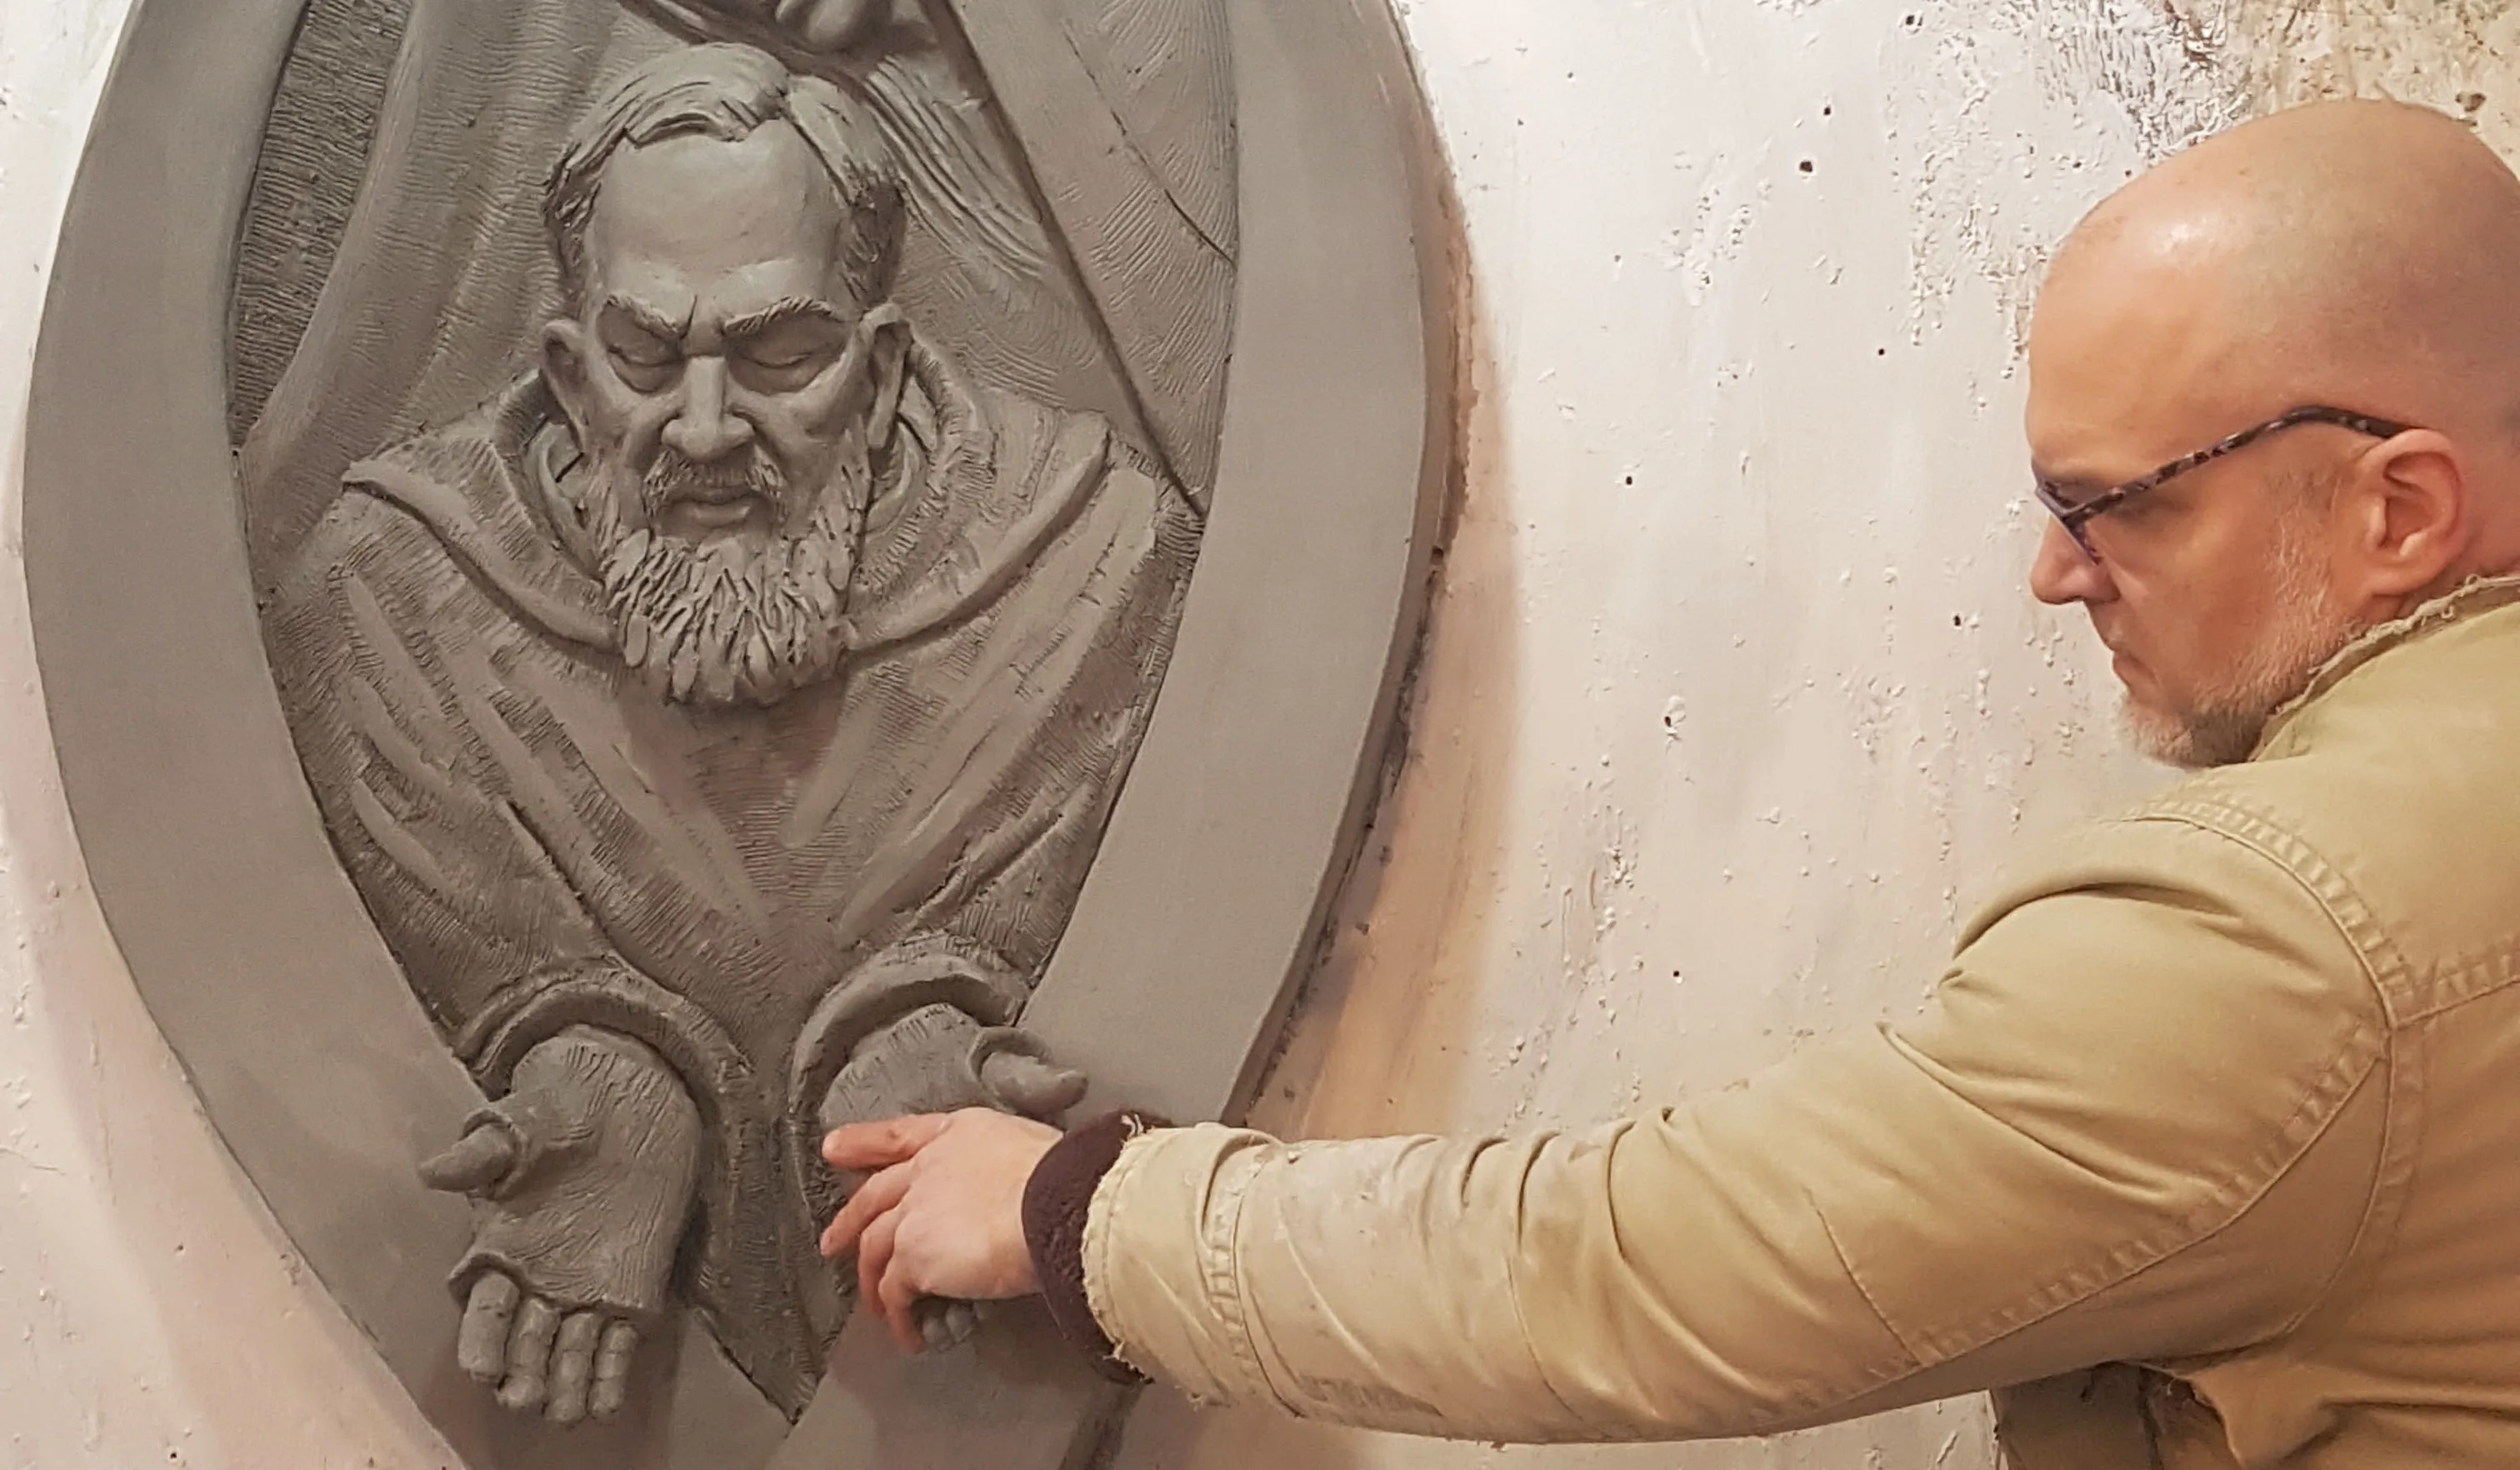 Artist Timothy P. Schmalz touches the hands of Padre Pio in one of his sculptures.?w=200&h=150